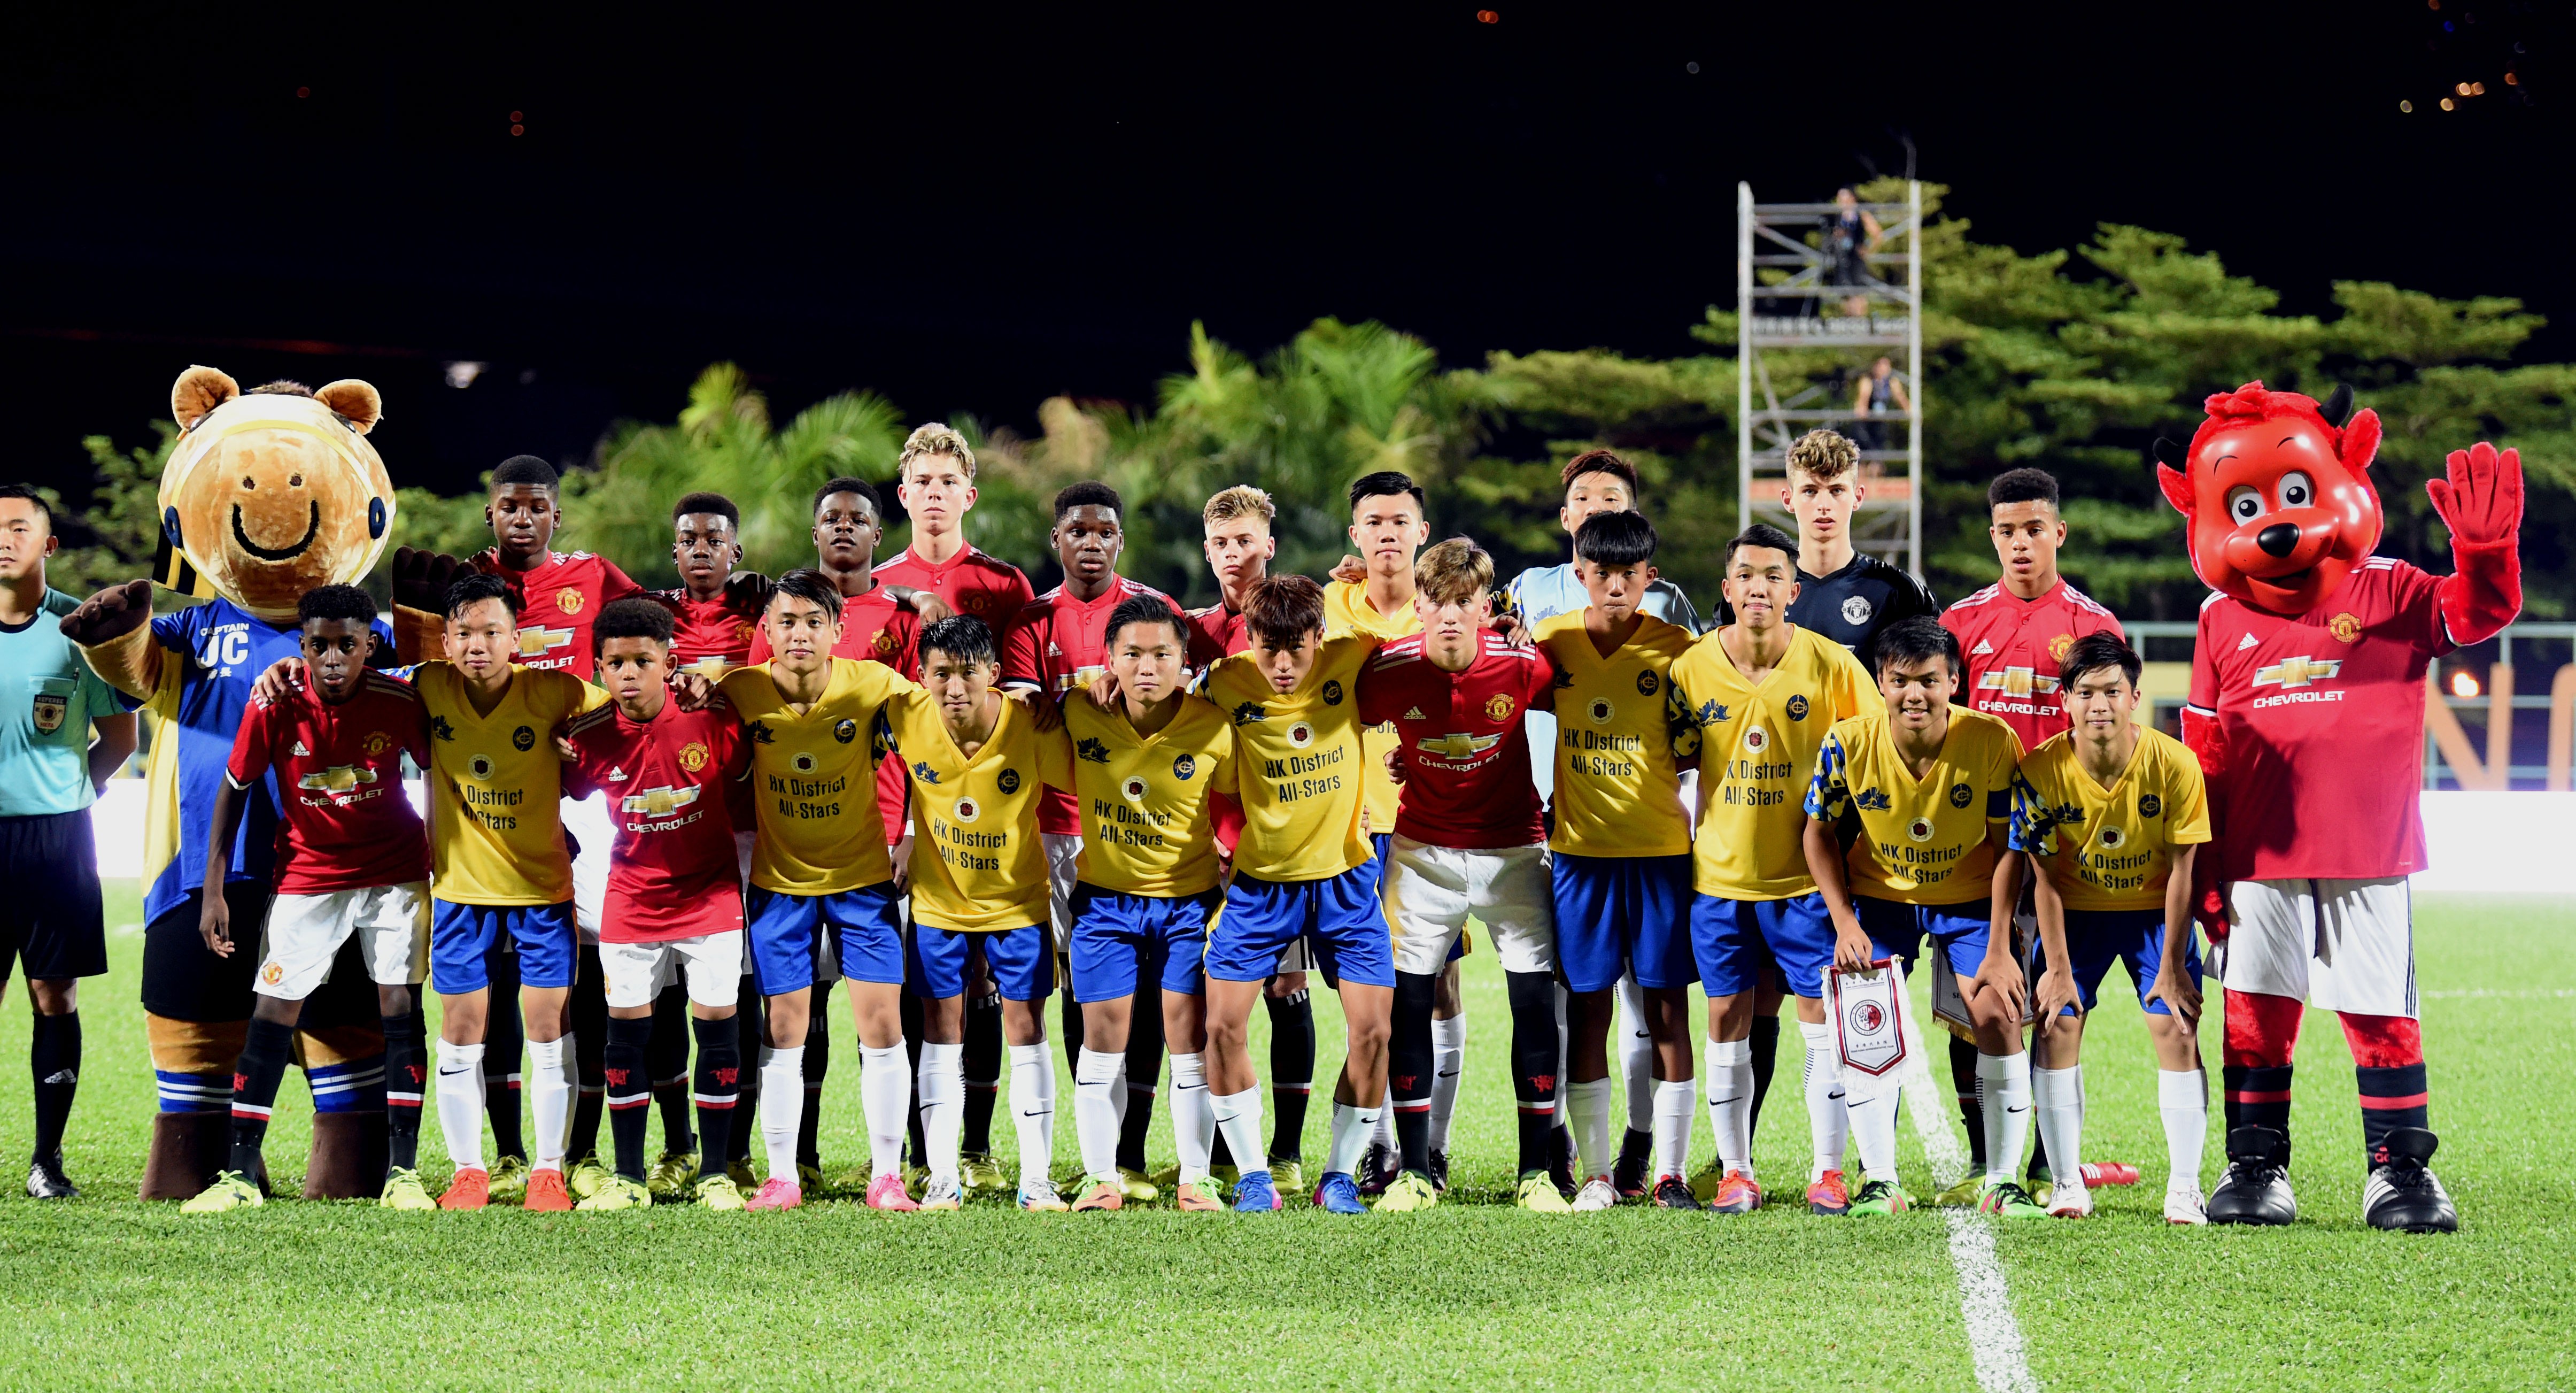 Manchester United Academy U16s faced Hong Kong District All-Stars in a friendly match on Wednesday Photos: Xinhua